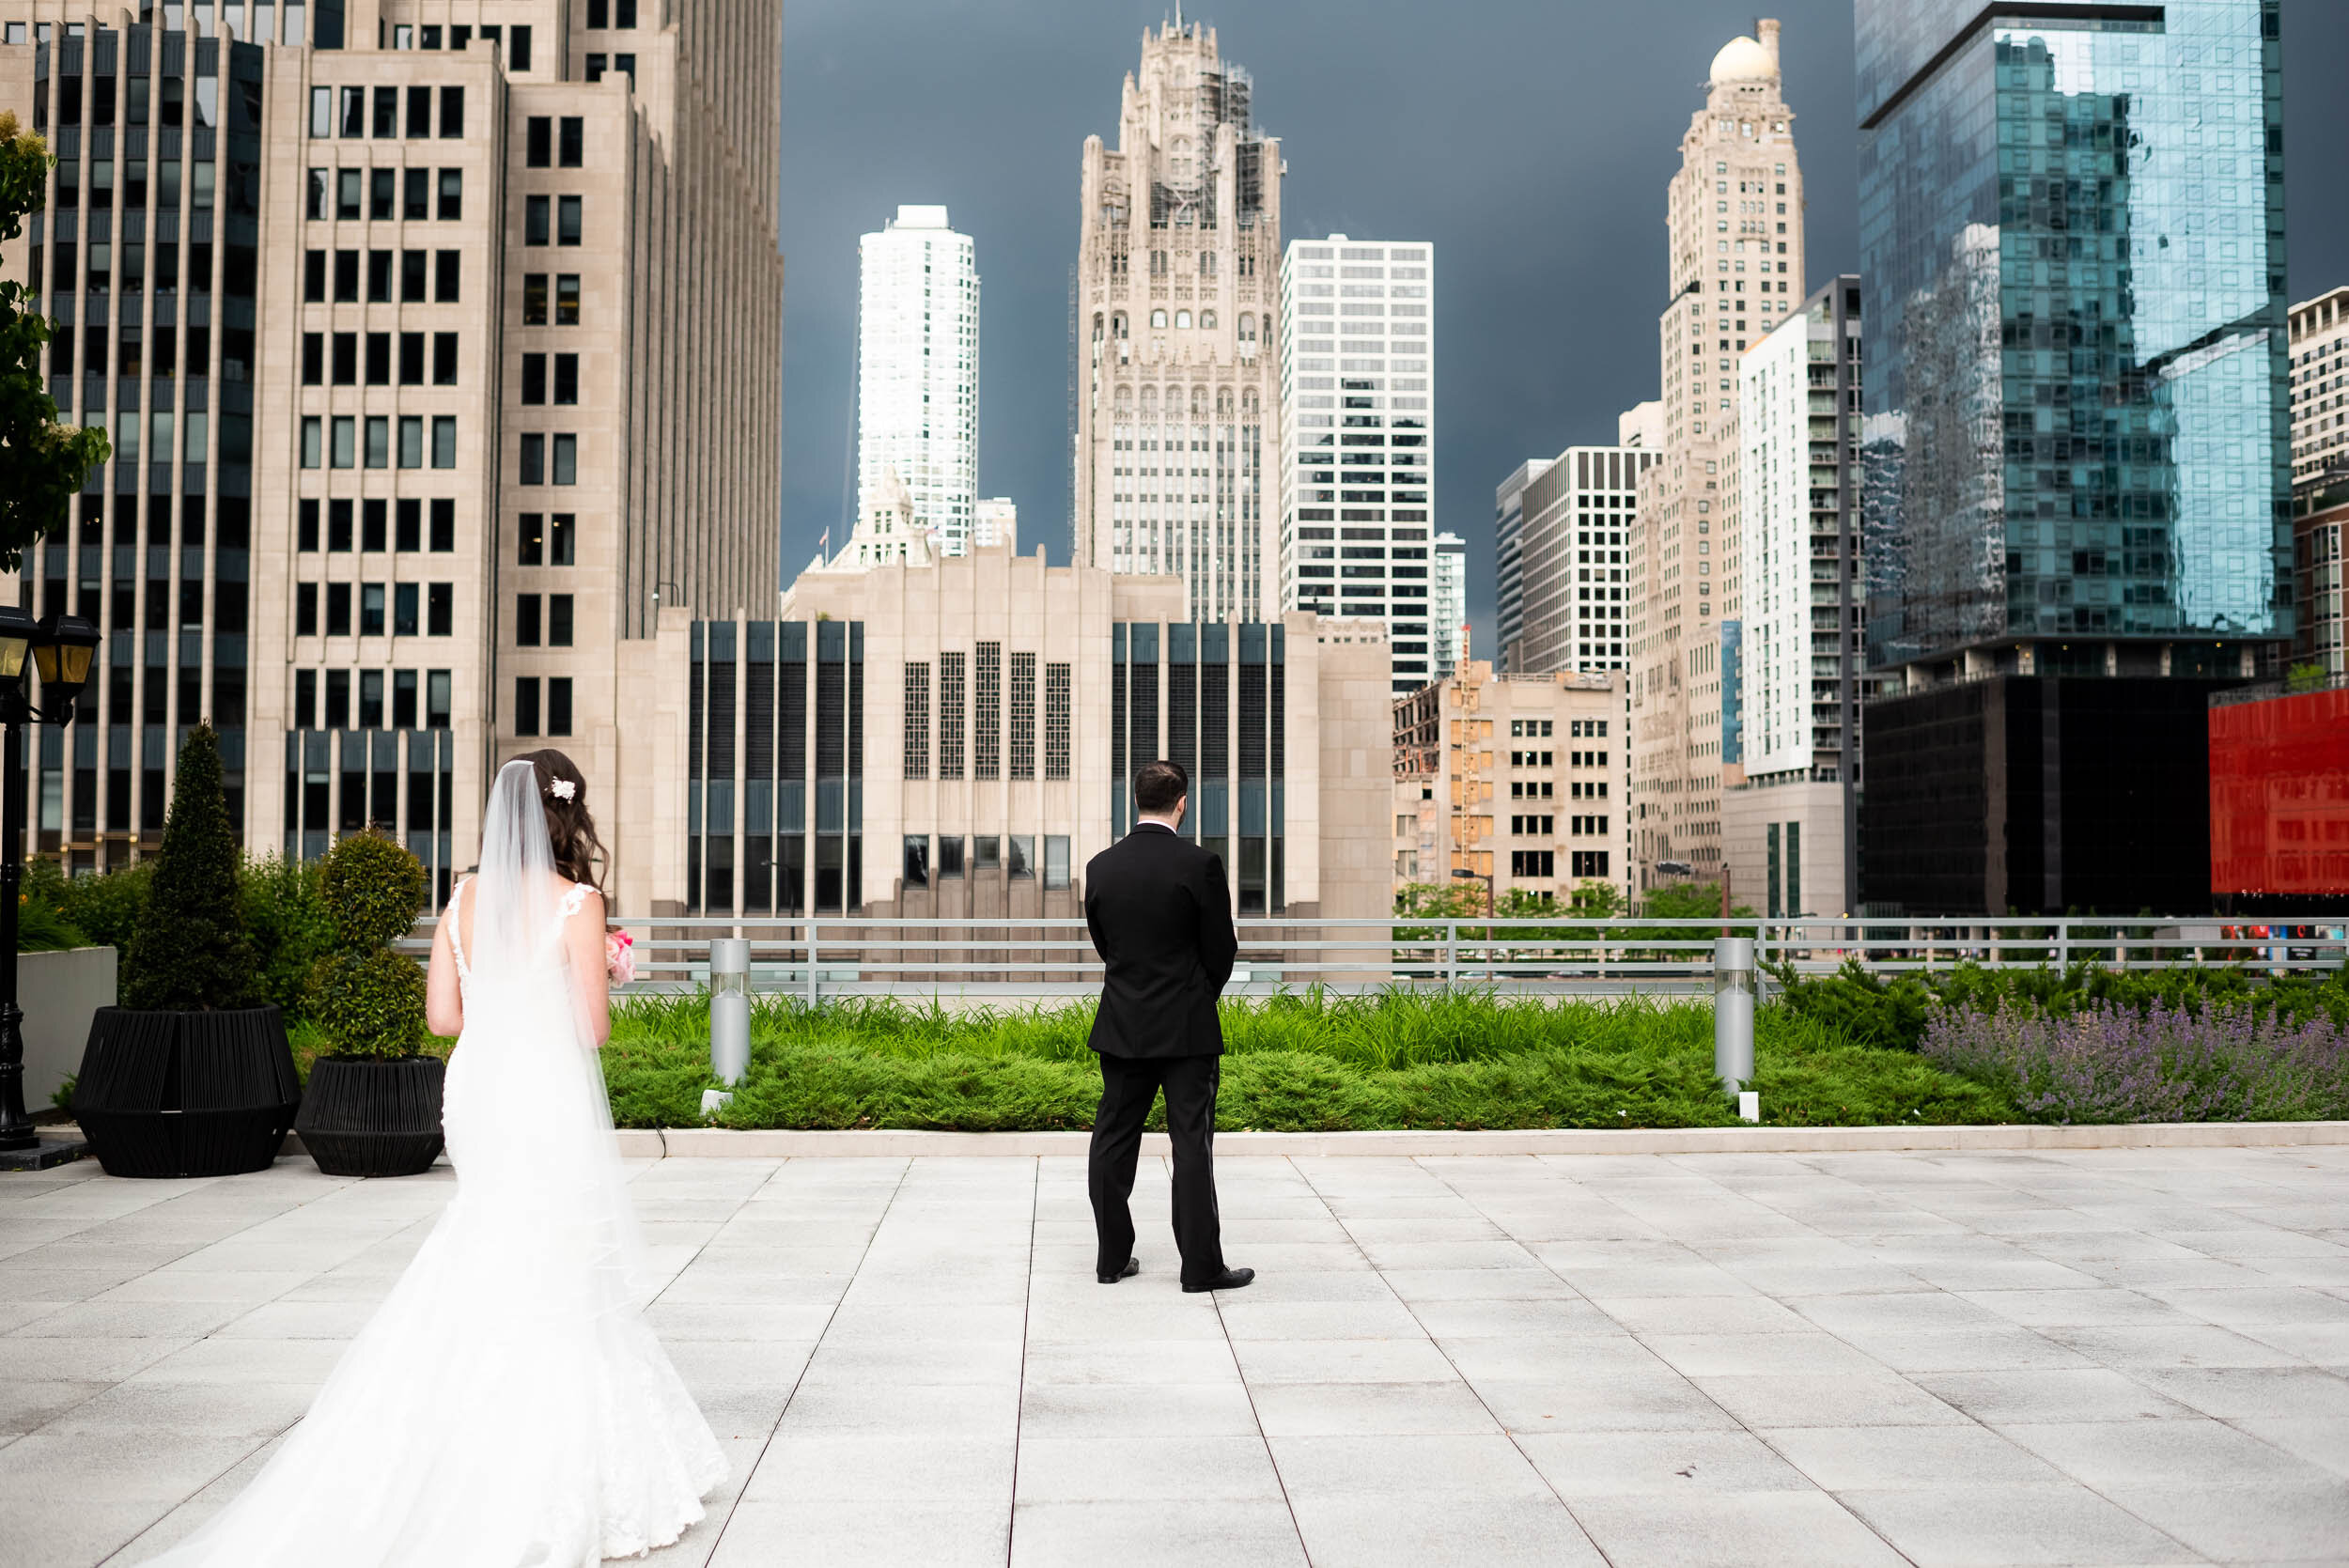 Wedding first look with stormy skies and Chicago skyline: Loews Chicago Hotel Wedding captured by J. Brown Photography